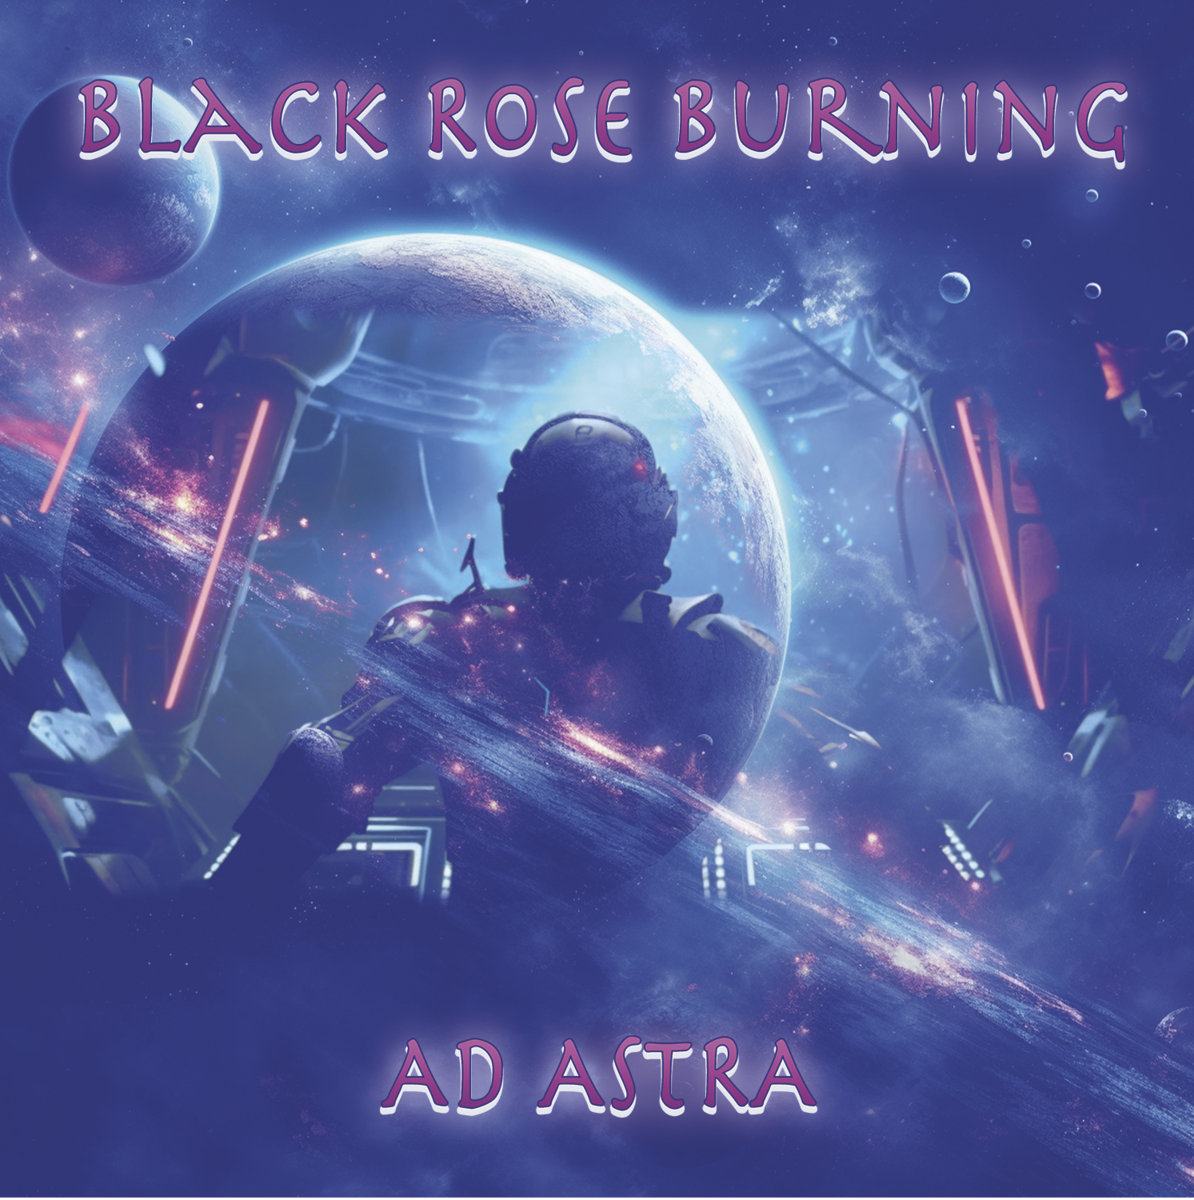 Art work from from Black Rose Burning's new album "Ad Astra.'